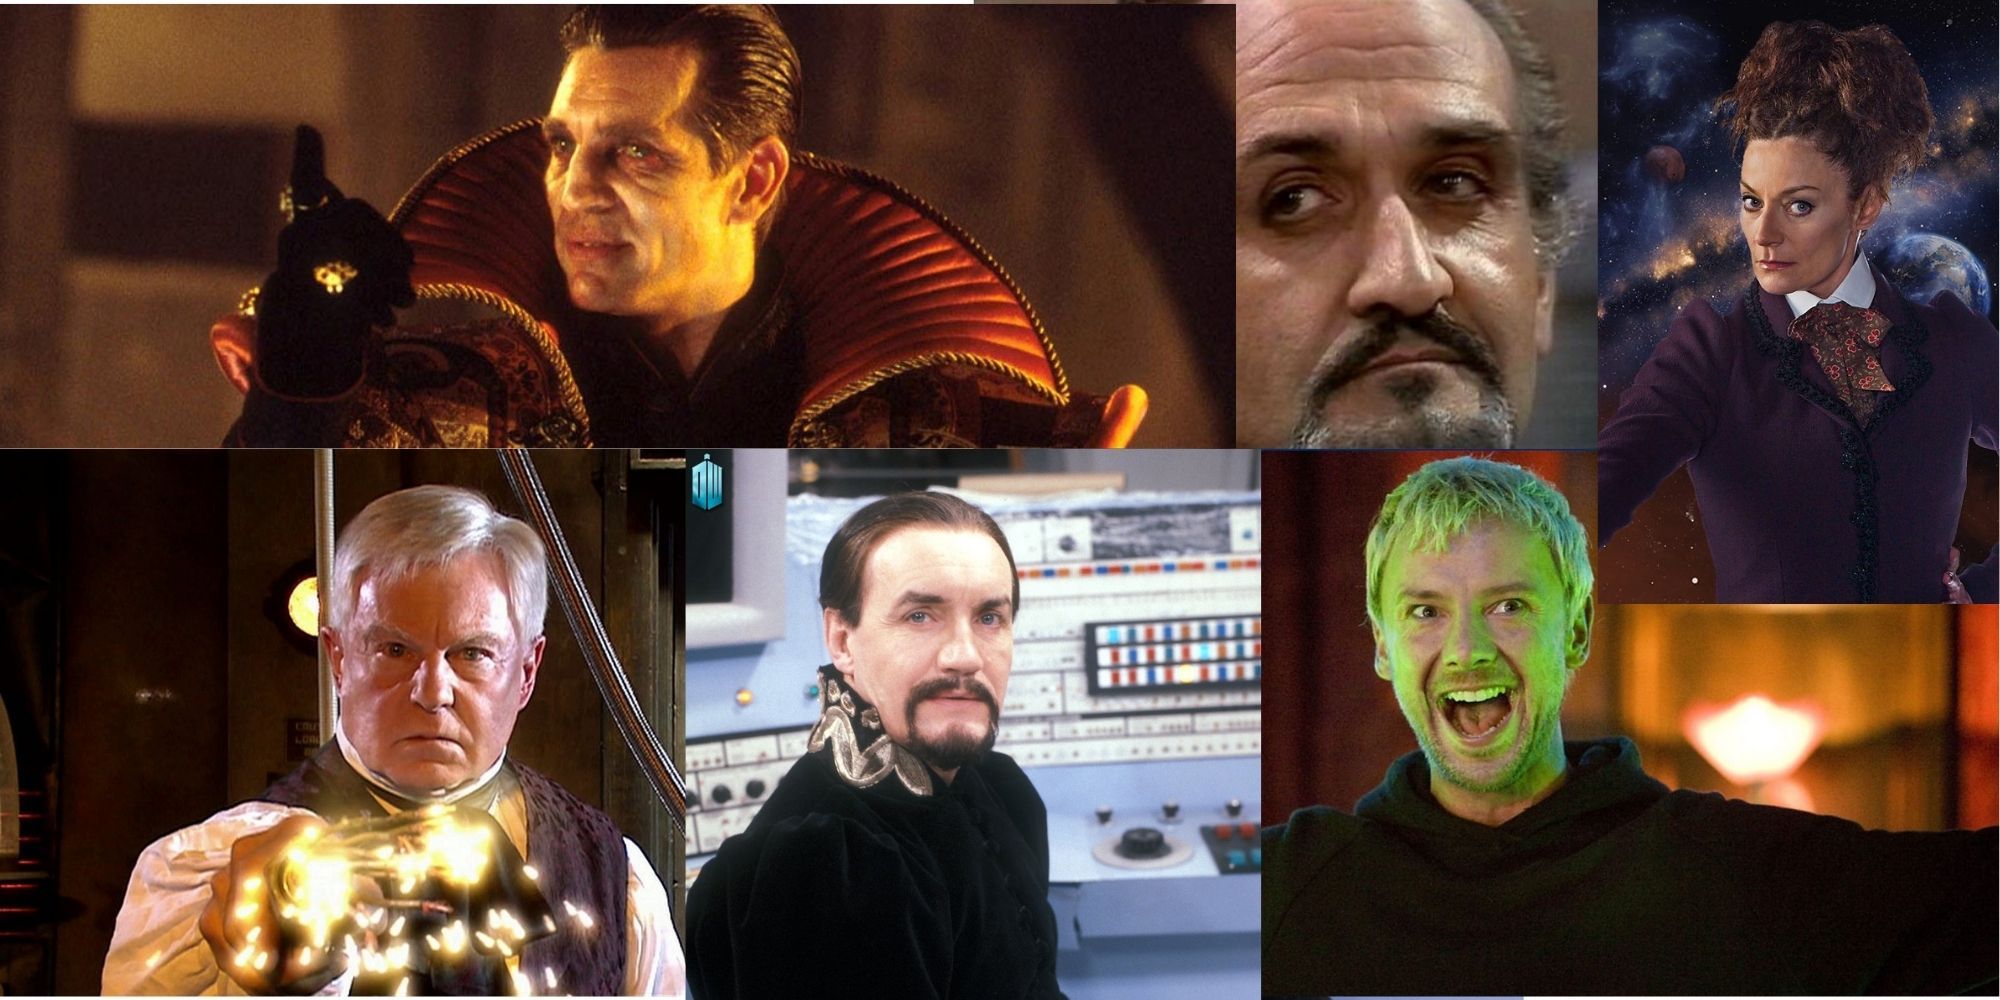 Split image of various incaranations of the Master, a character from the TV show Doctor Who.